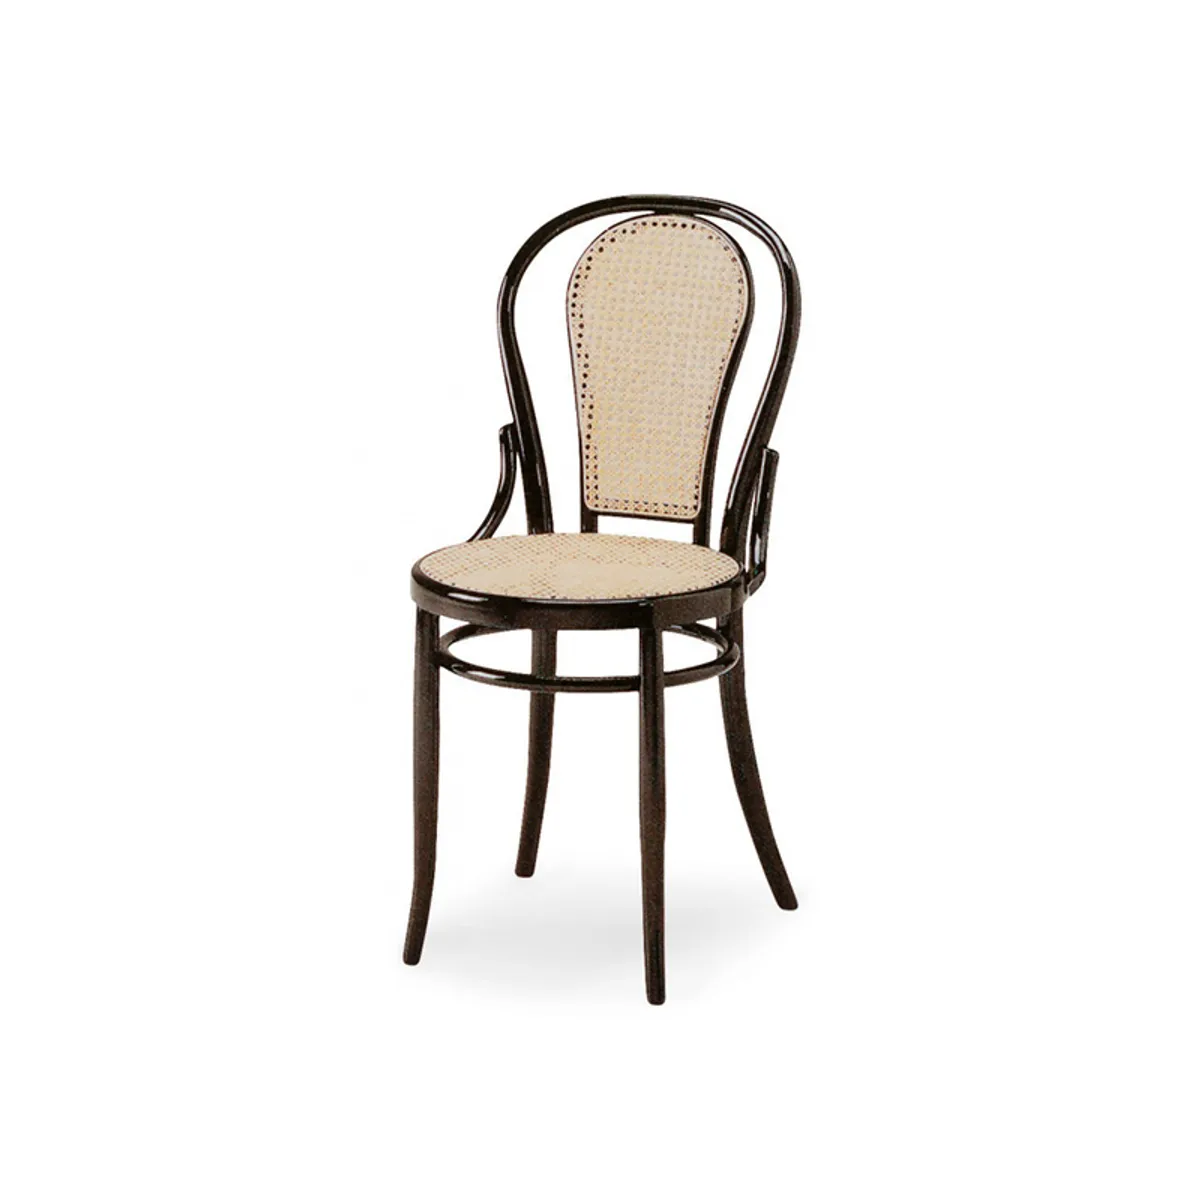 Bentwood 21 Side Chair With Cane Seating For Restaurants And Bars